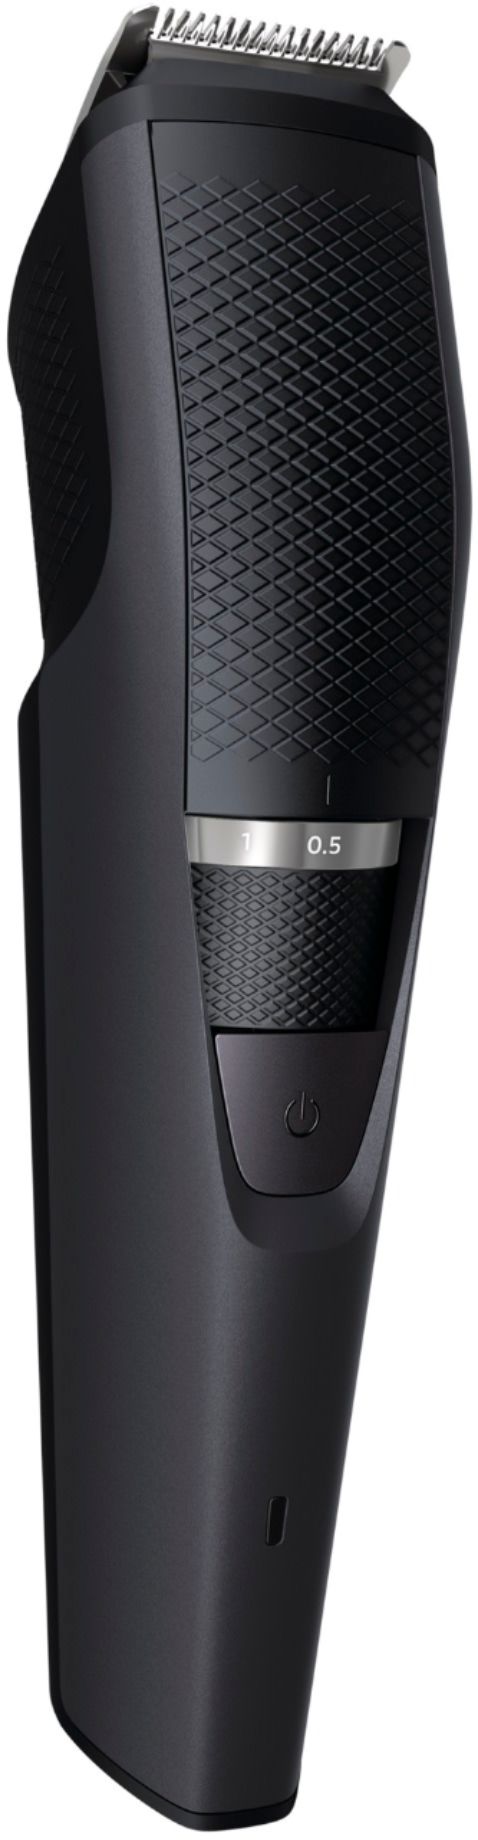 norelco 3000 hair trimmer